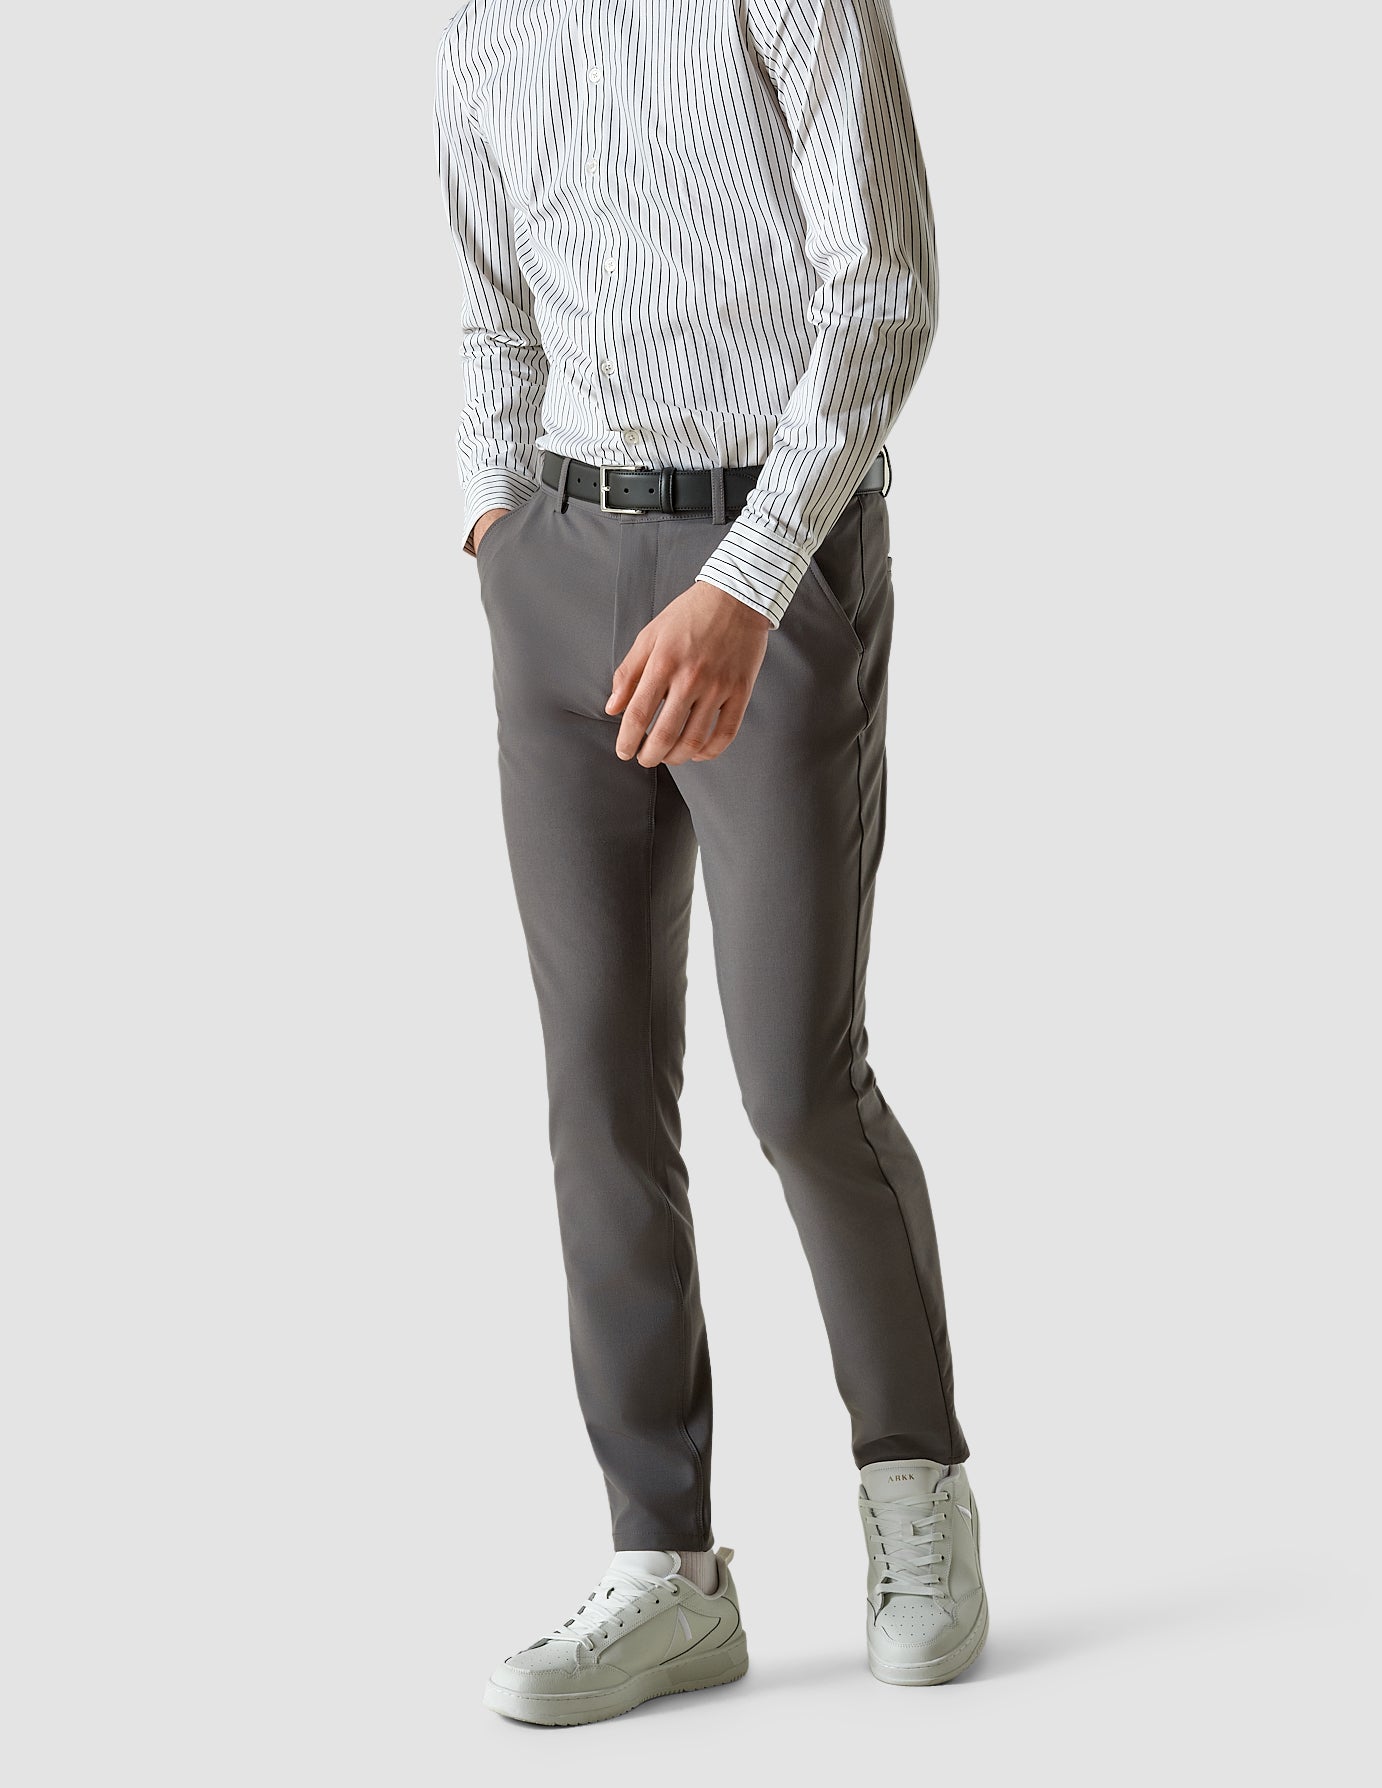 Buy Men Grey Slim Fit Textured Flat Front Casual Trousers Online - 744831 |  Louis Philippe